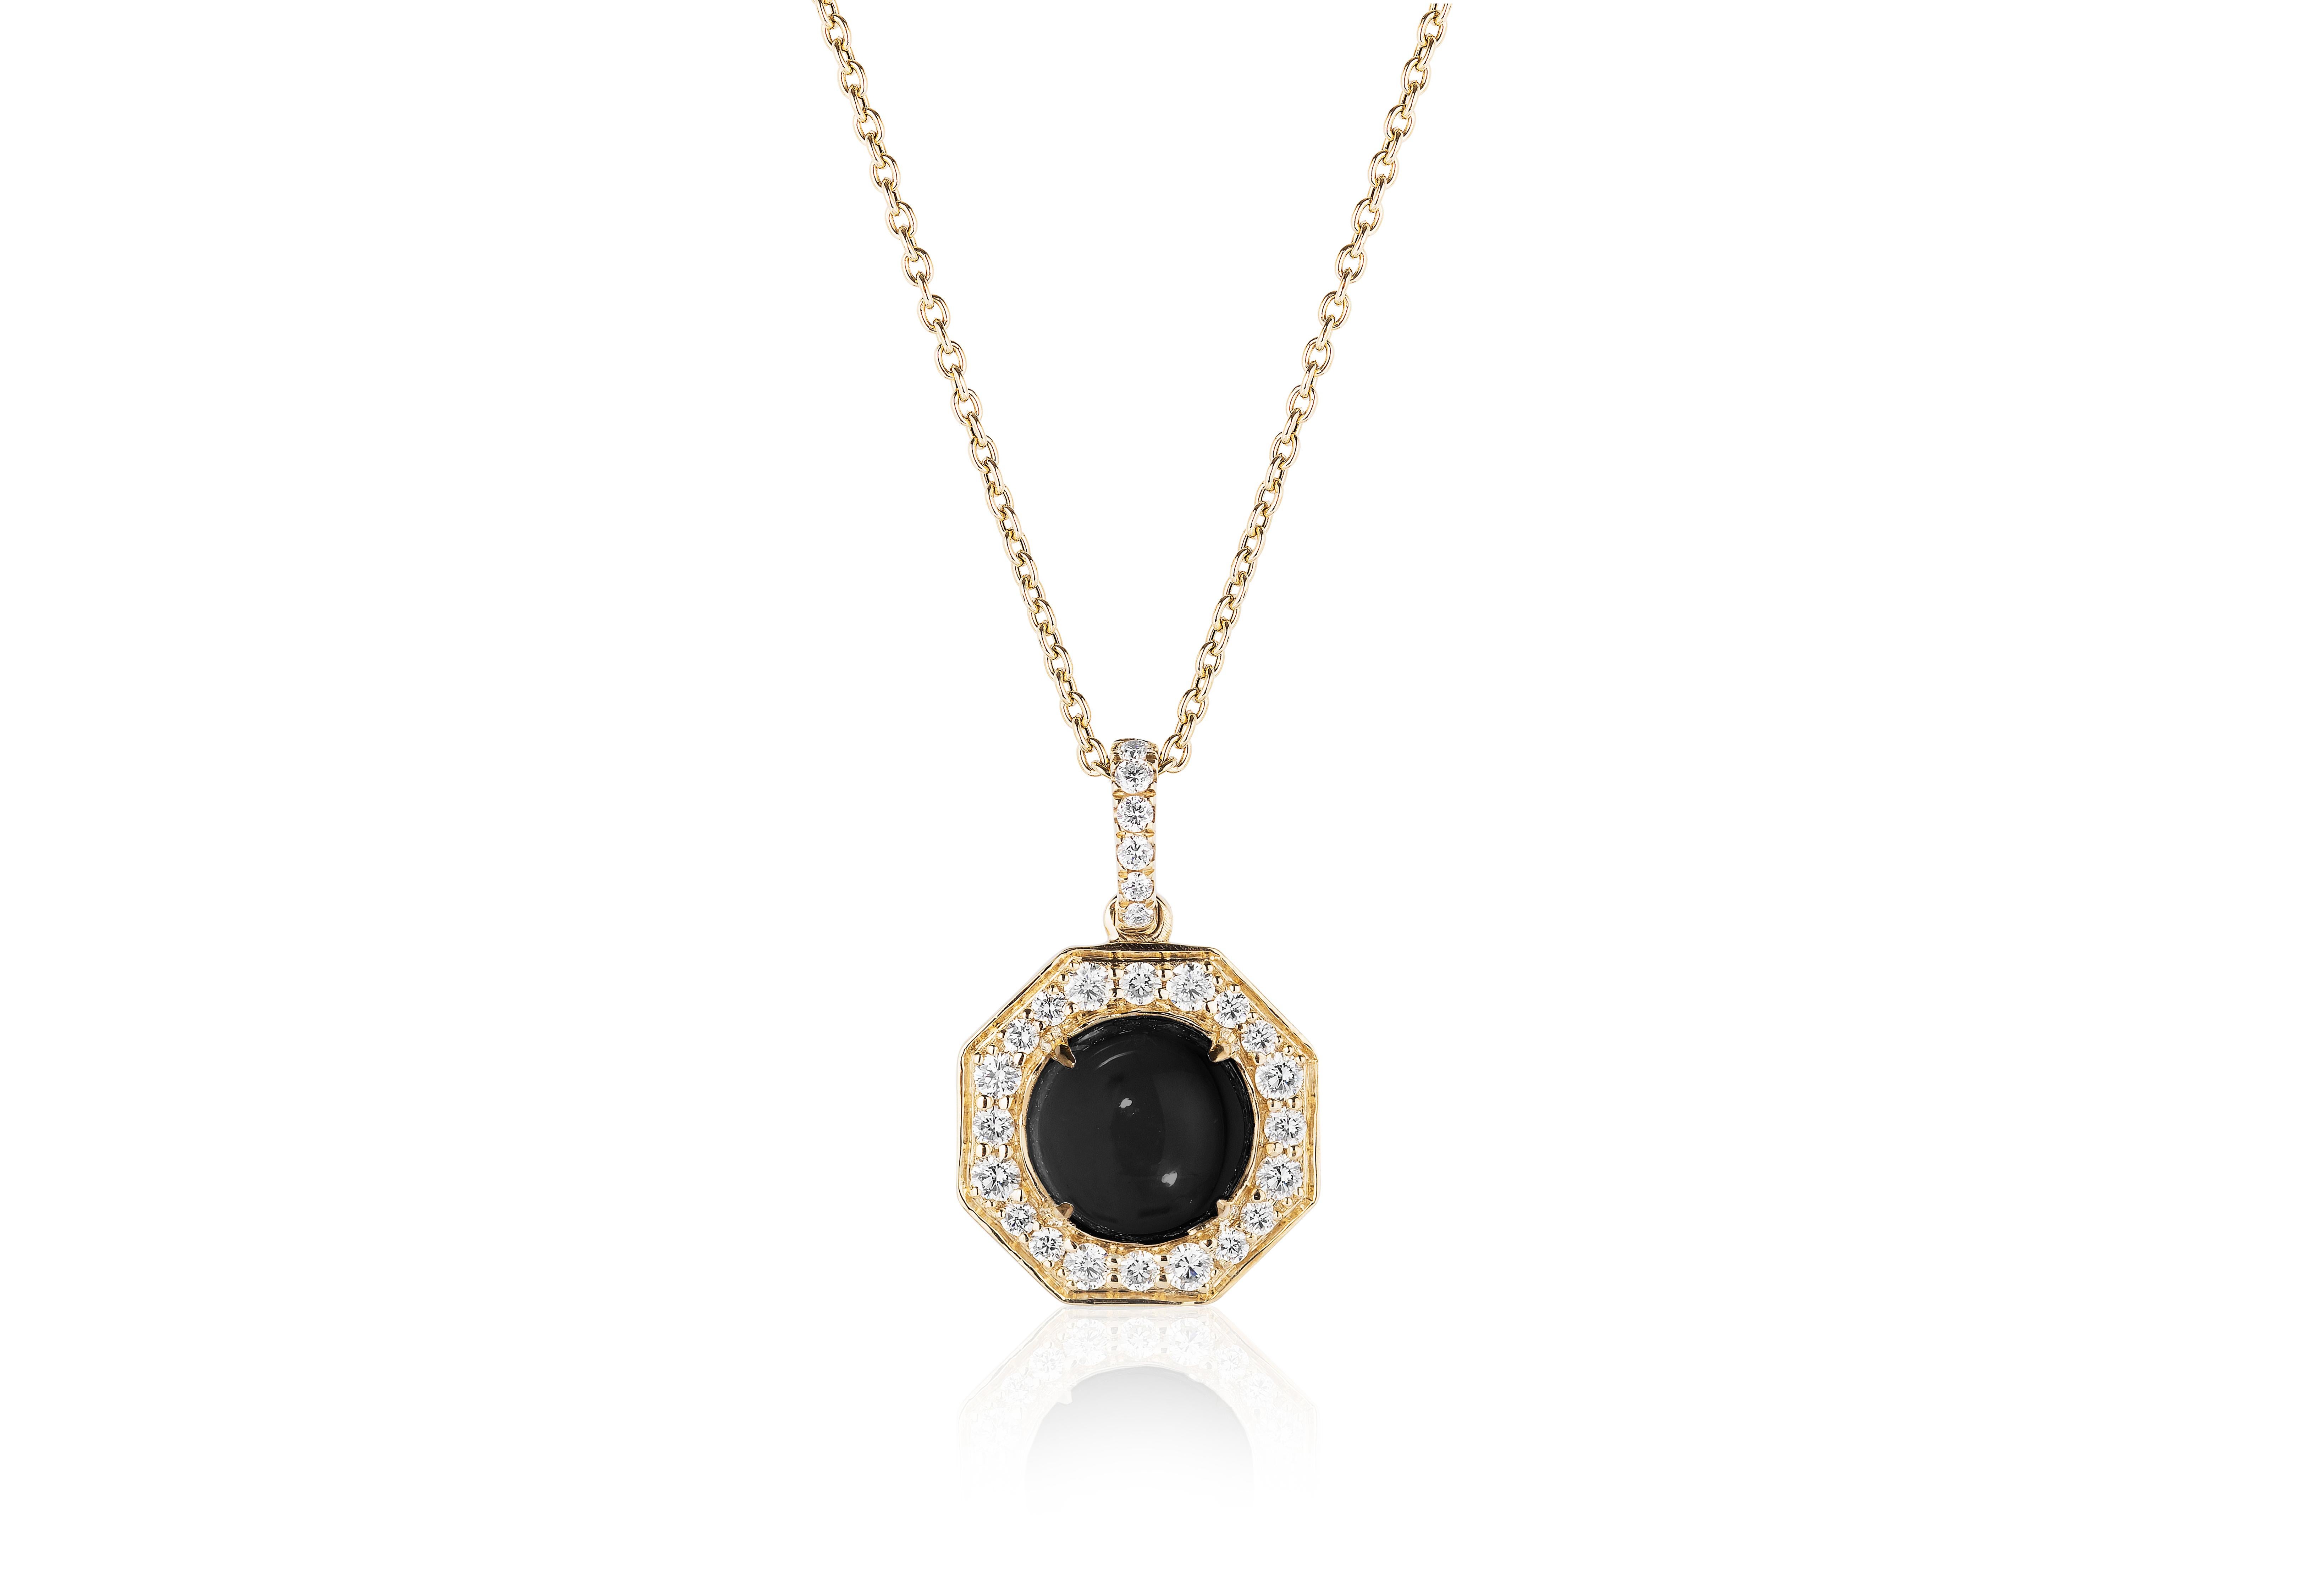 Onyx Cabochon Small Pendant with Diamonds in 18k Yellow Gold, from 'Rock N Roll' Collection

Stone Size: 8 mm

Gemstone Weight: 4.74 Carats

Diamond: G-H / VS, Approx Wt: 0.60 Carats